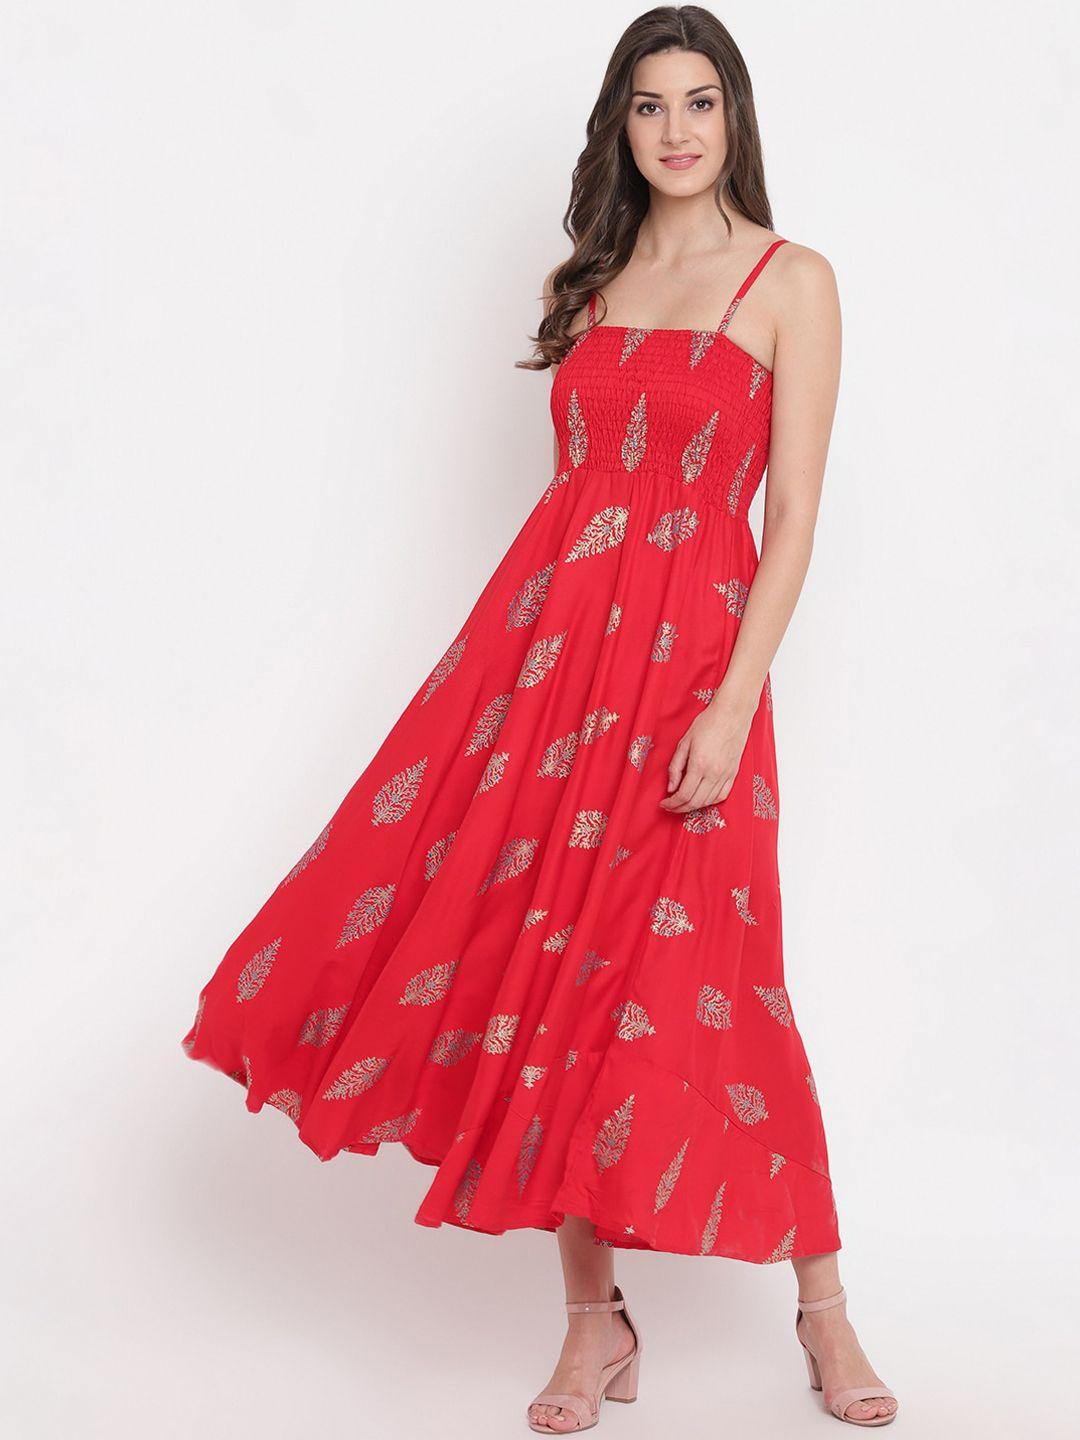 aawari women red printed cotton gown dress